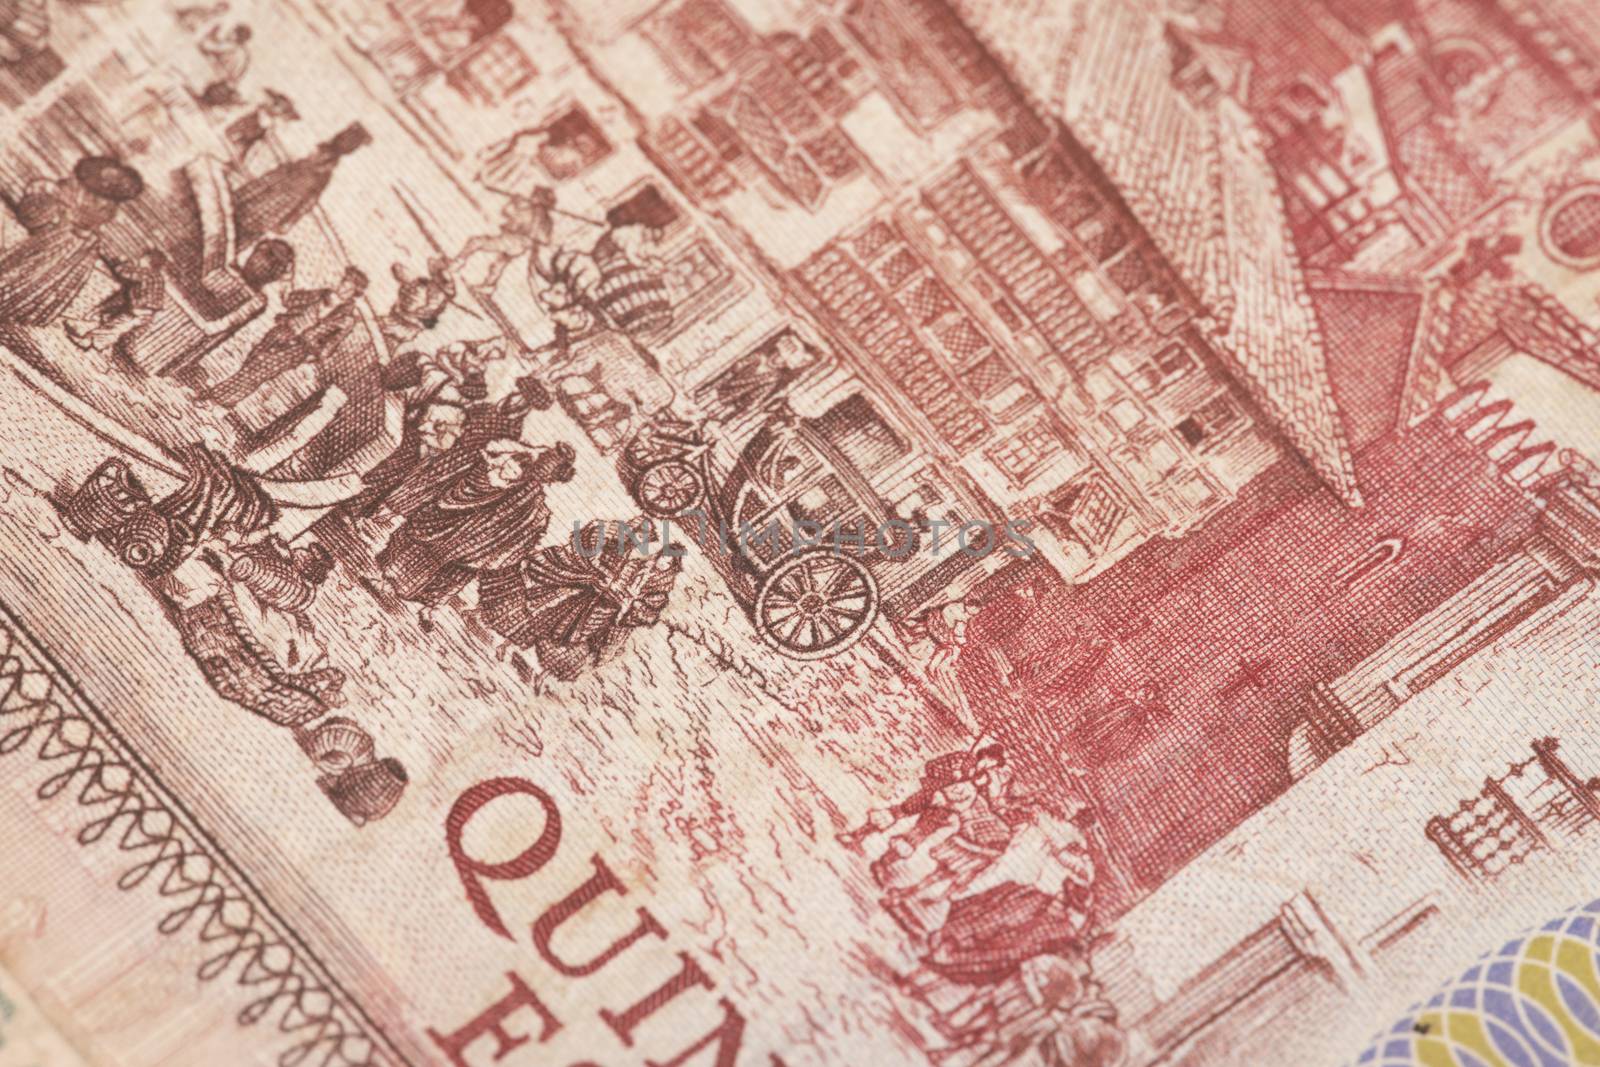 Obsolete bank note detail by membio